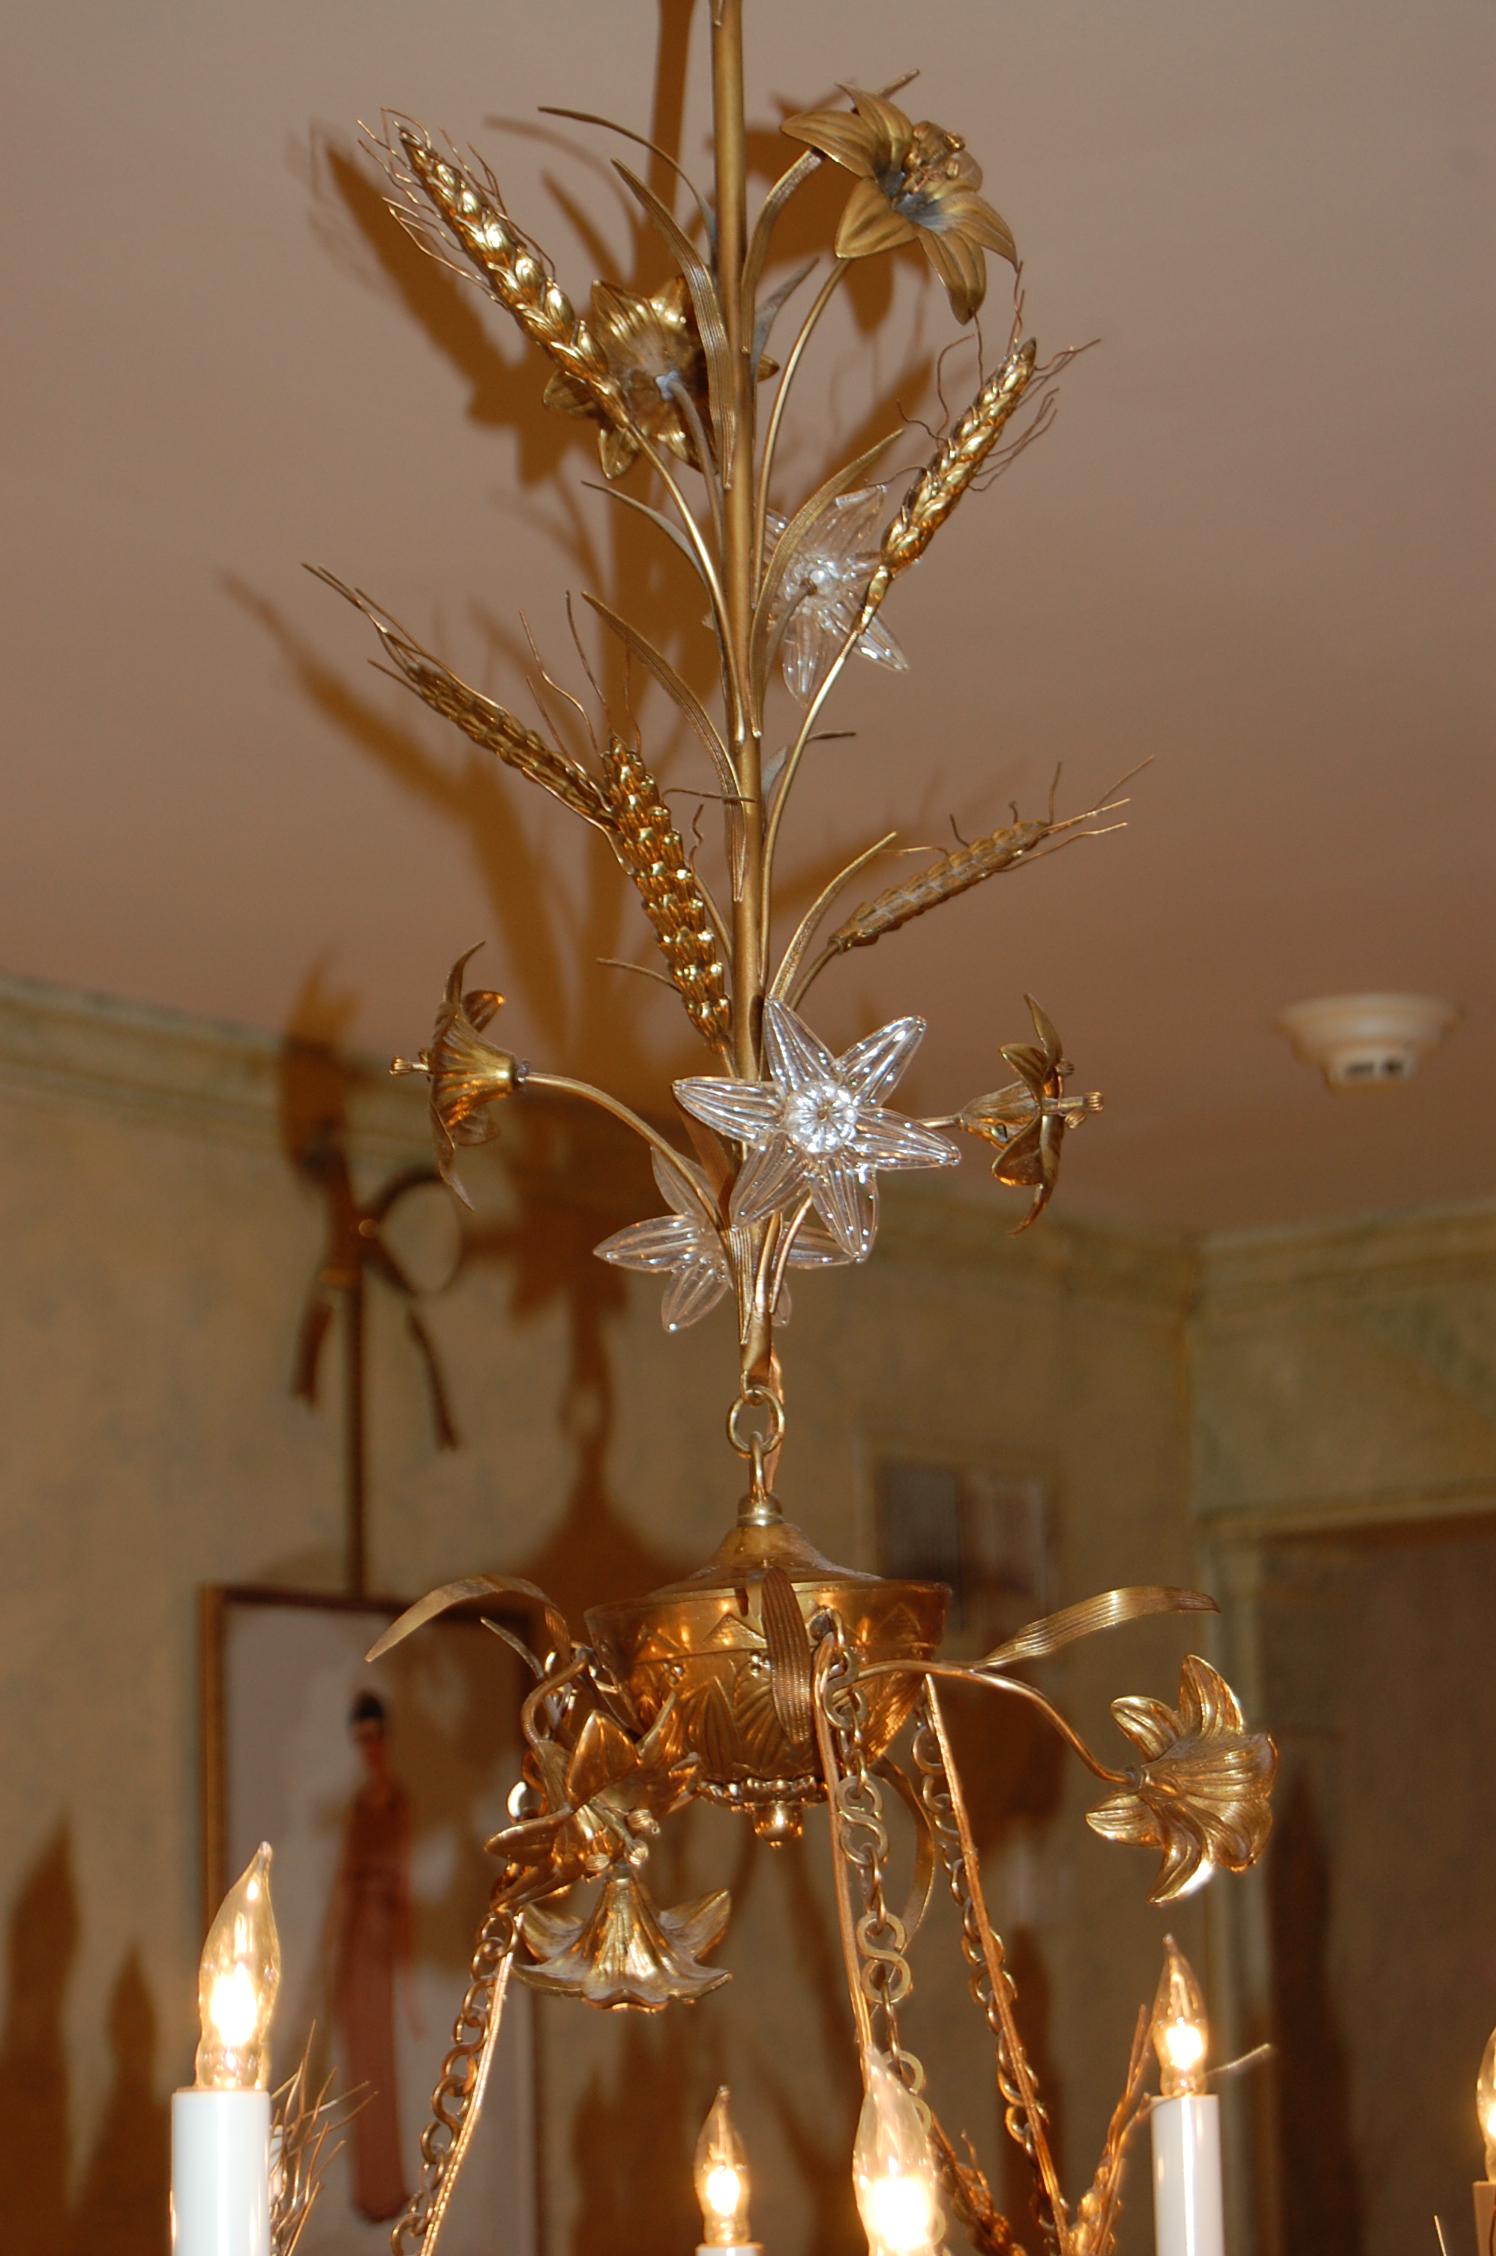 Gilt Brass Chandelier with Clusters of Brass Grapes, Leaves and Sheaths of Wheat 7